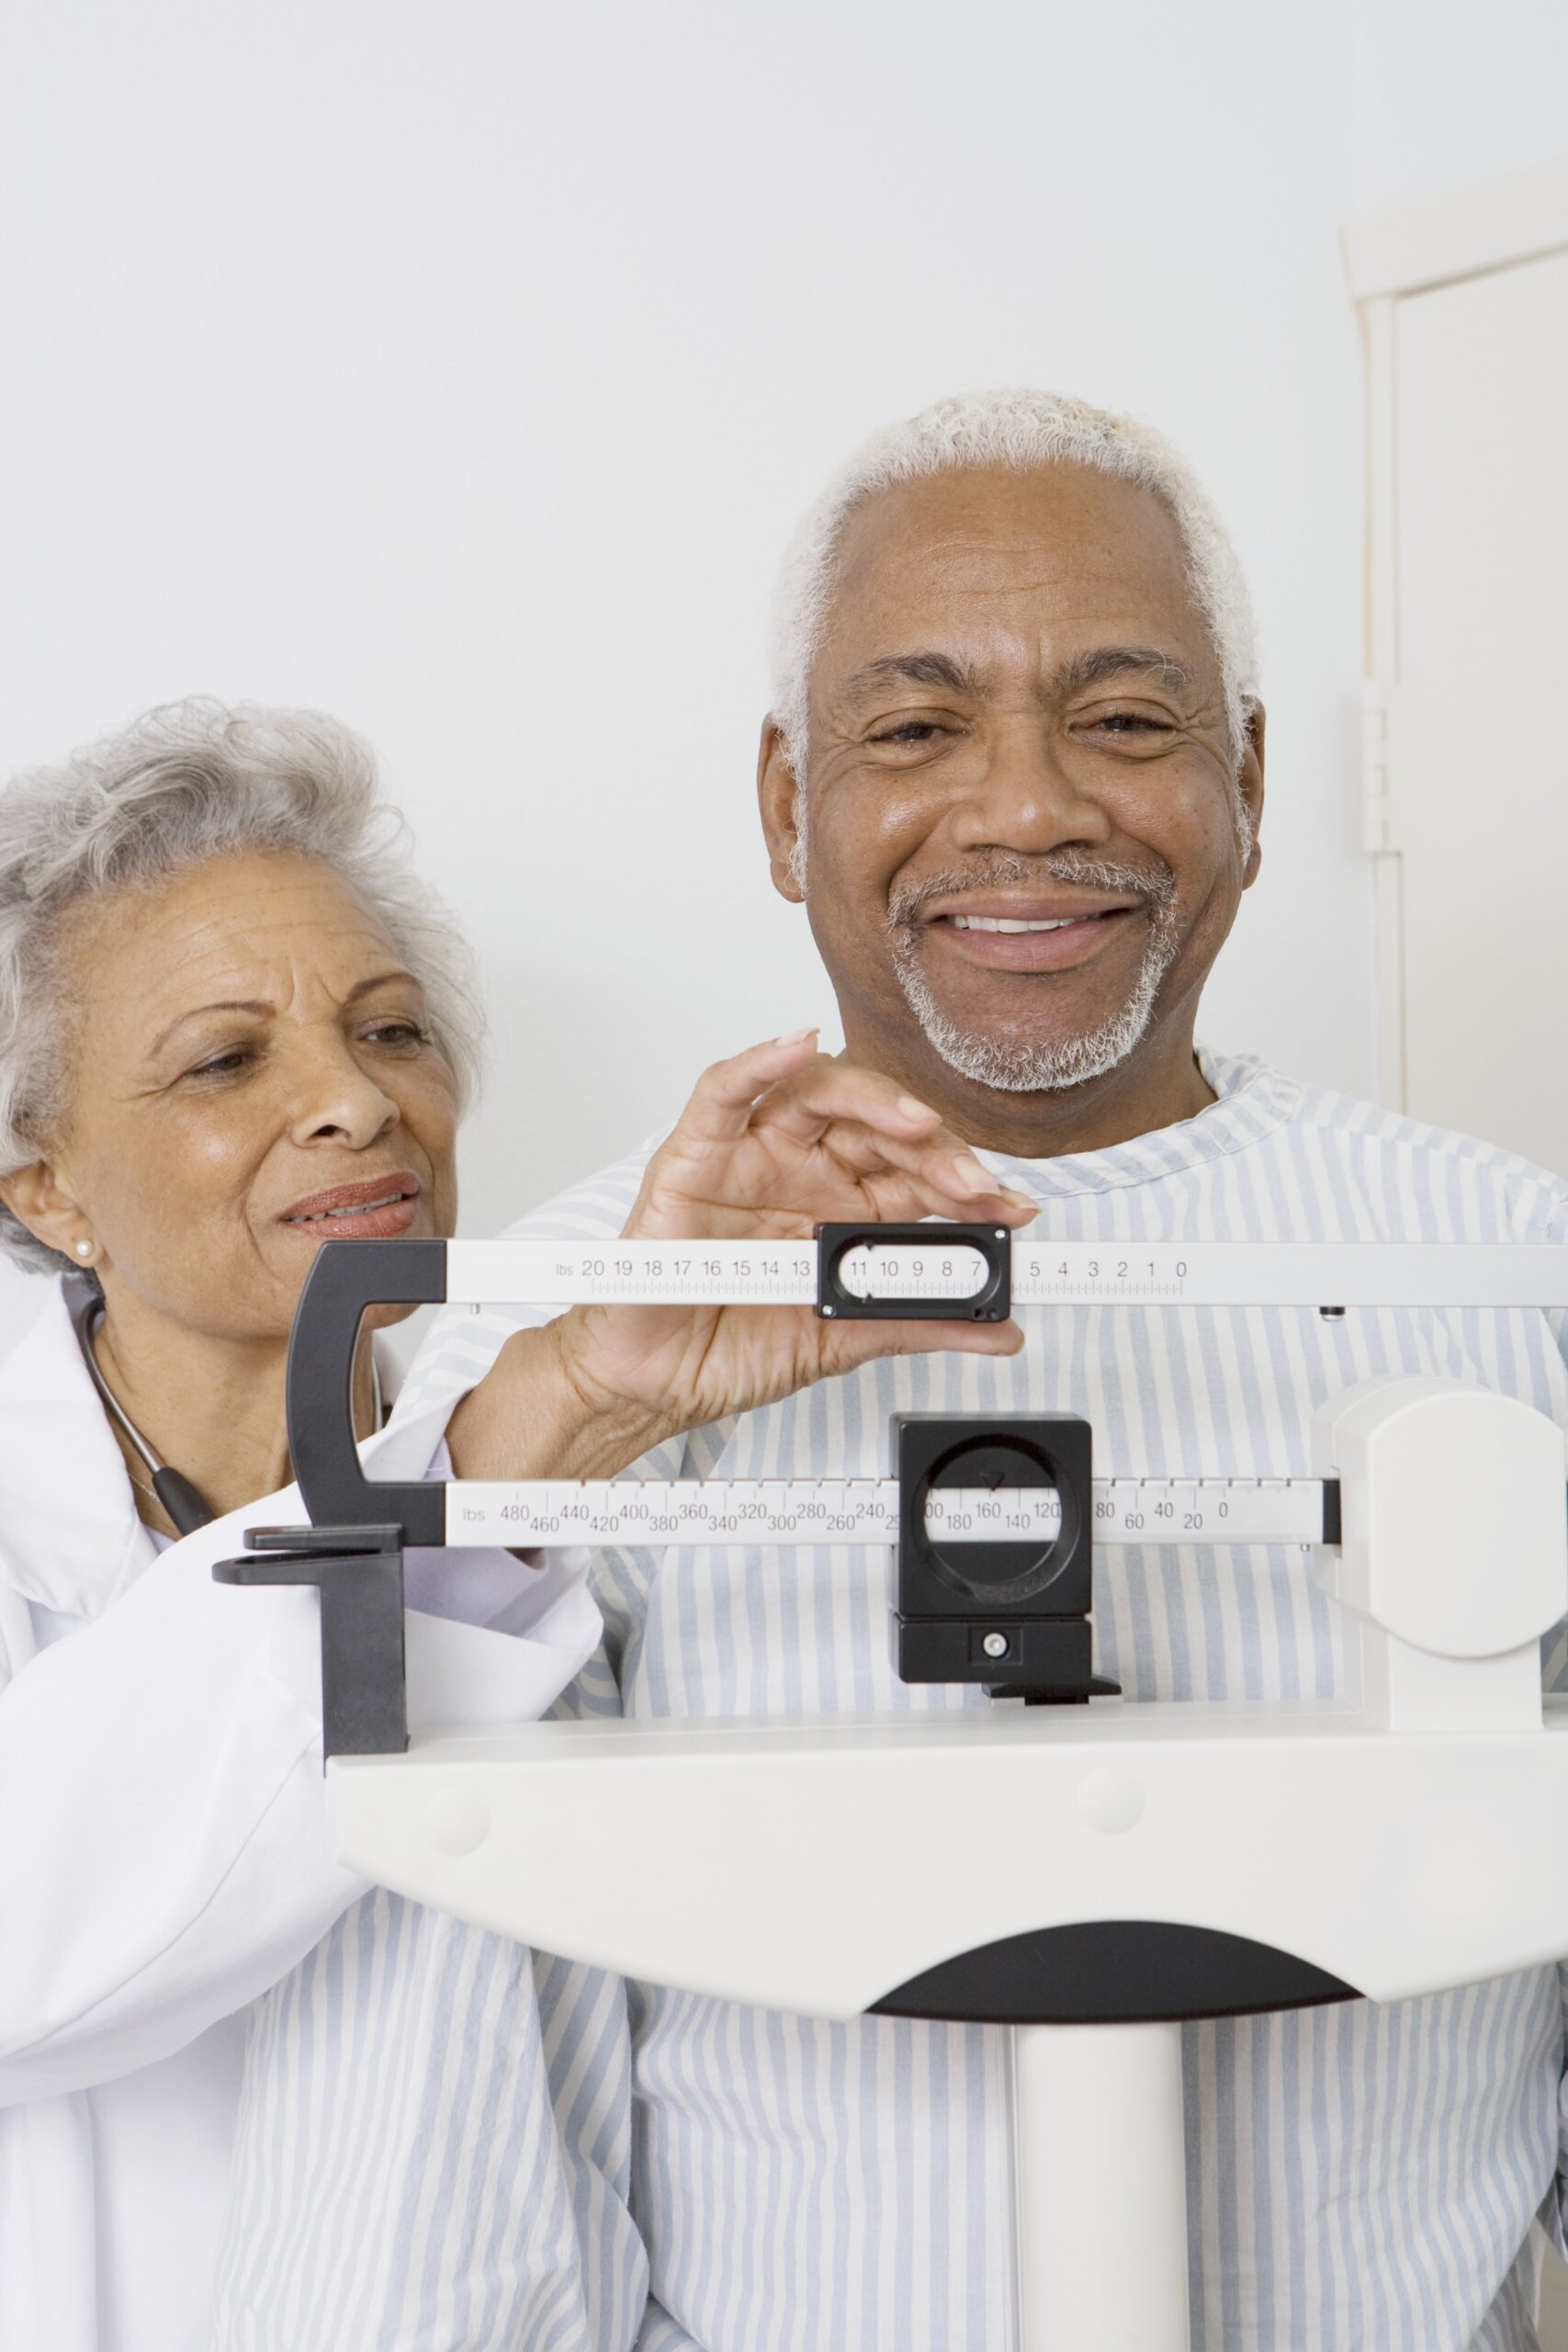 Smiling senior man stepping on a scale standing next to a doctor.